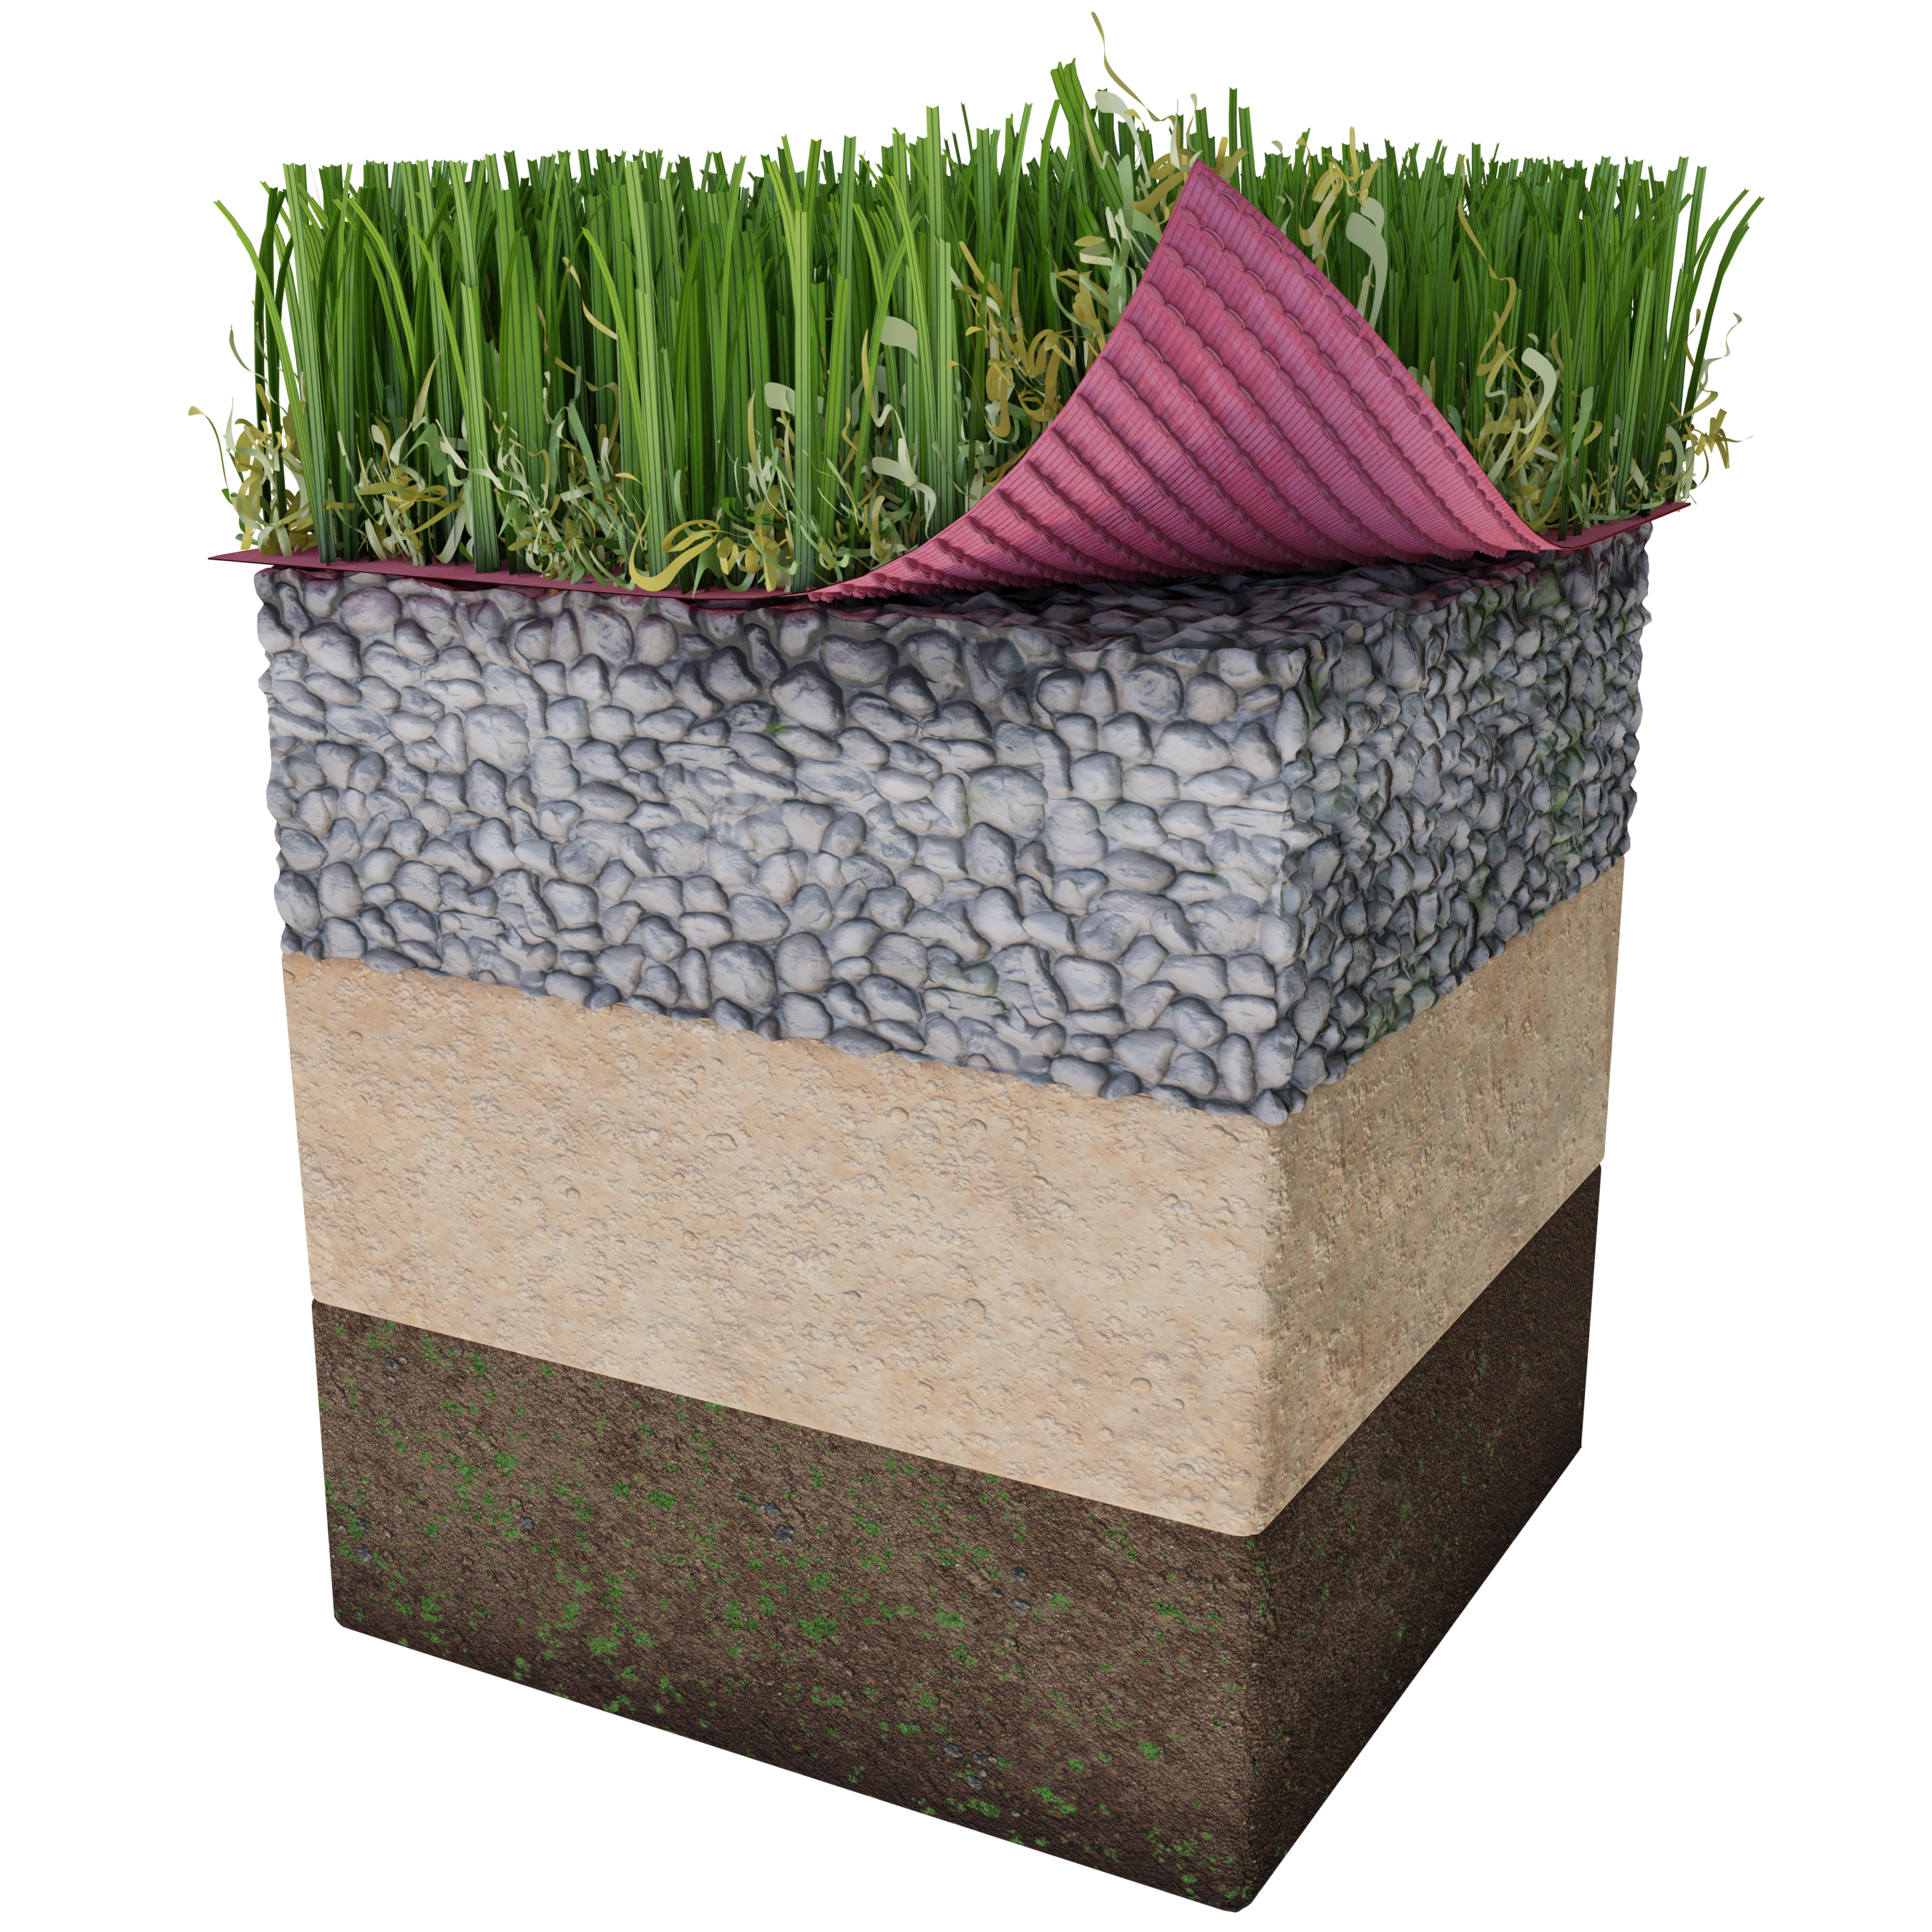 big-bully-turf-artificial-grass-layers-pink-backing